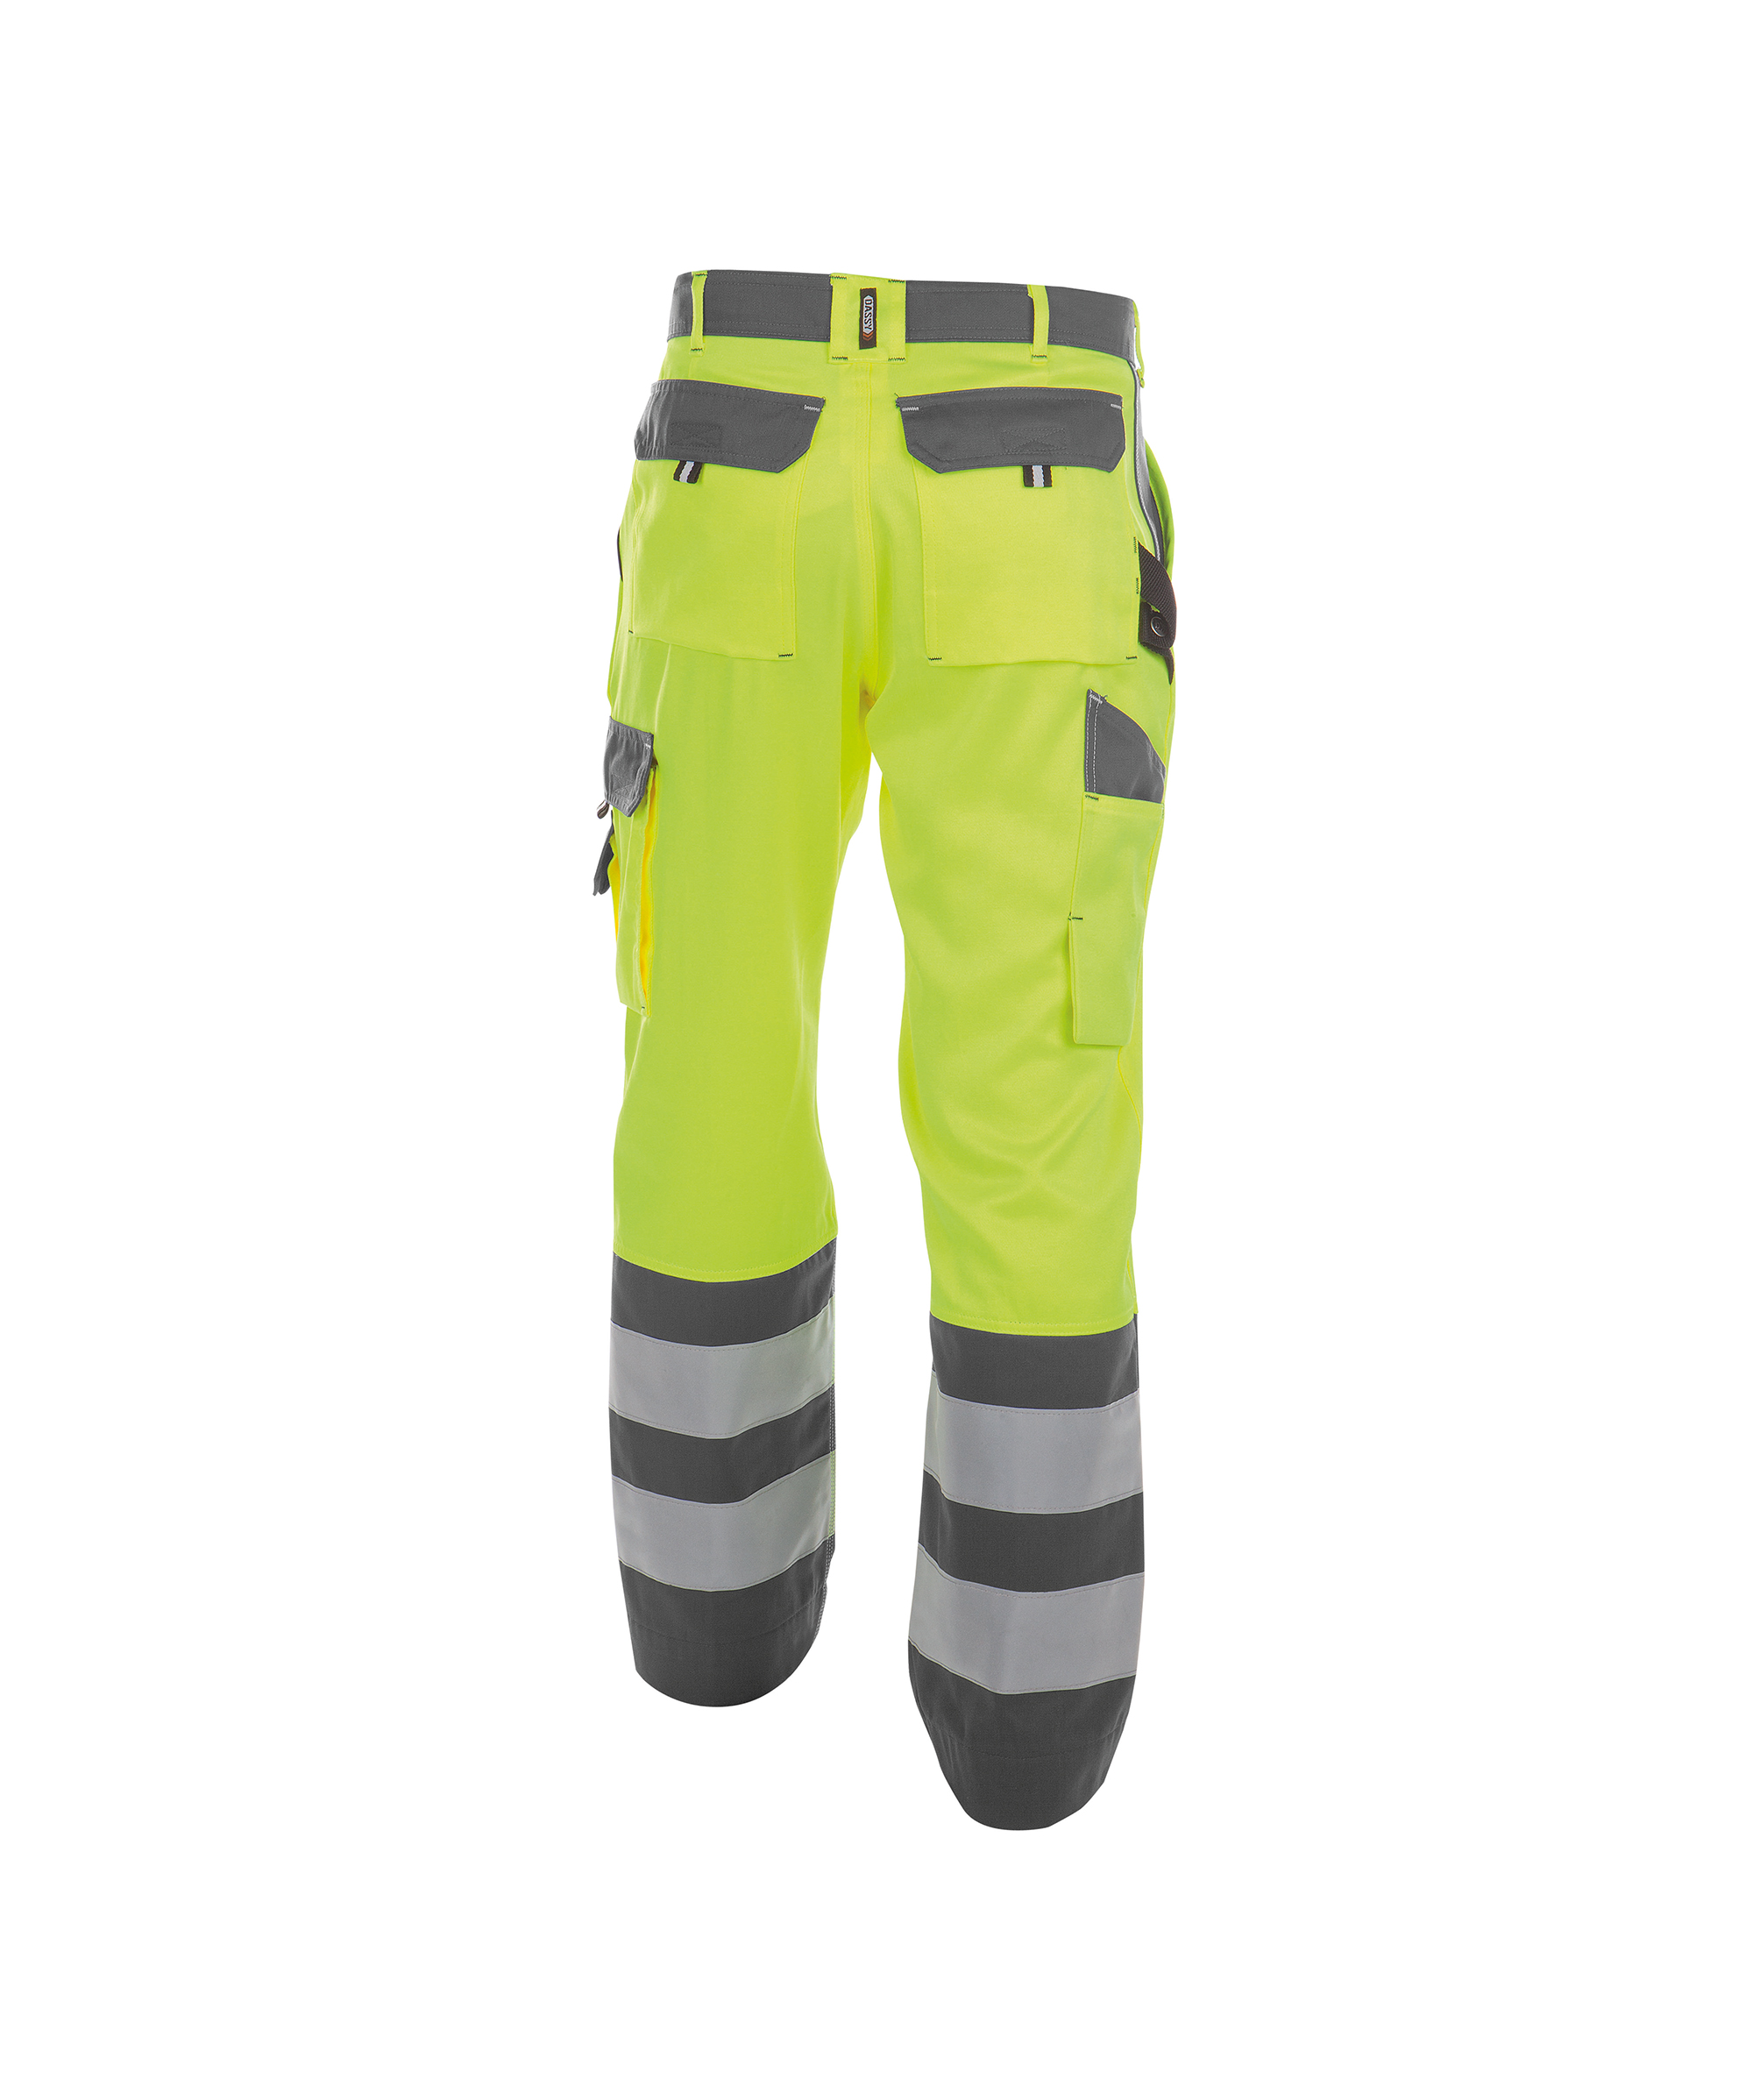 lancaster_high-visibility-work-trousers_fluo-yellow-cement-grey_back.jpg